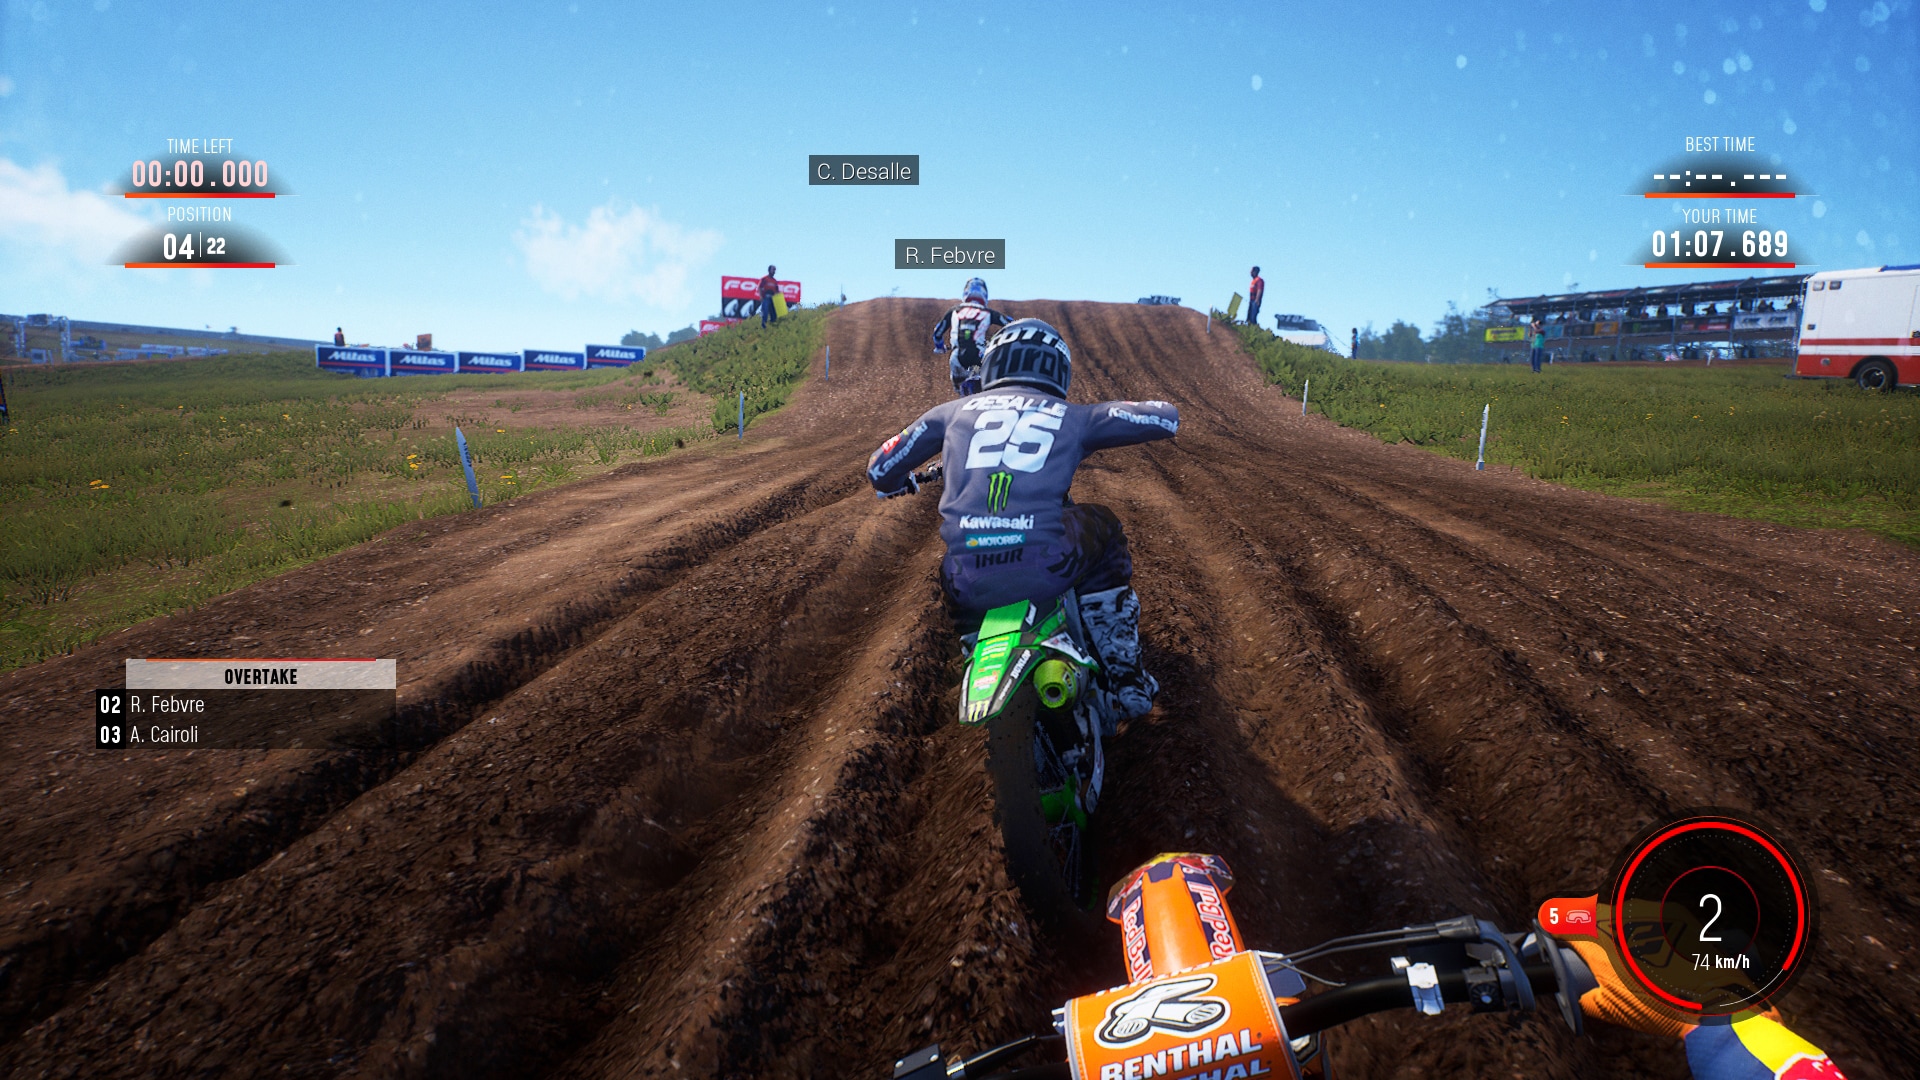 MXGP 2019 - The Official Motocross Videogame Steam Key GLOBAL - 3